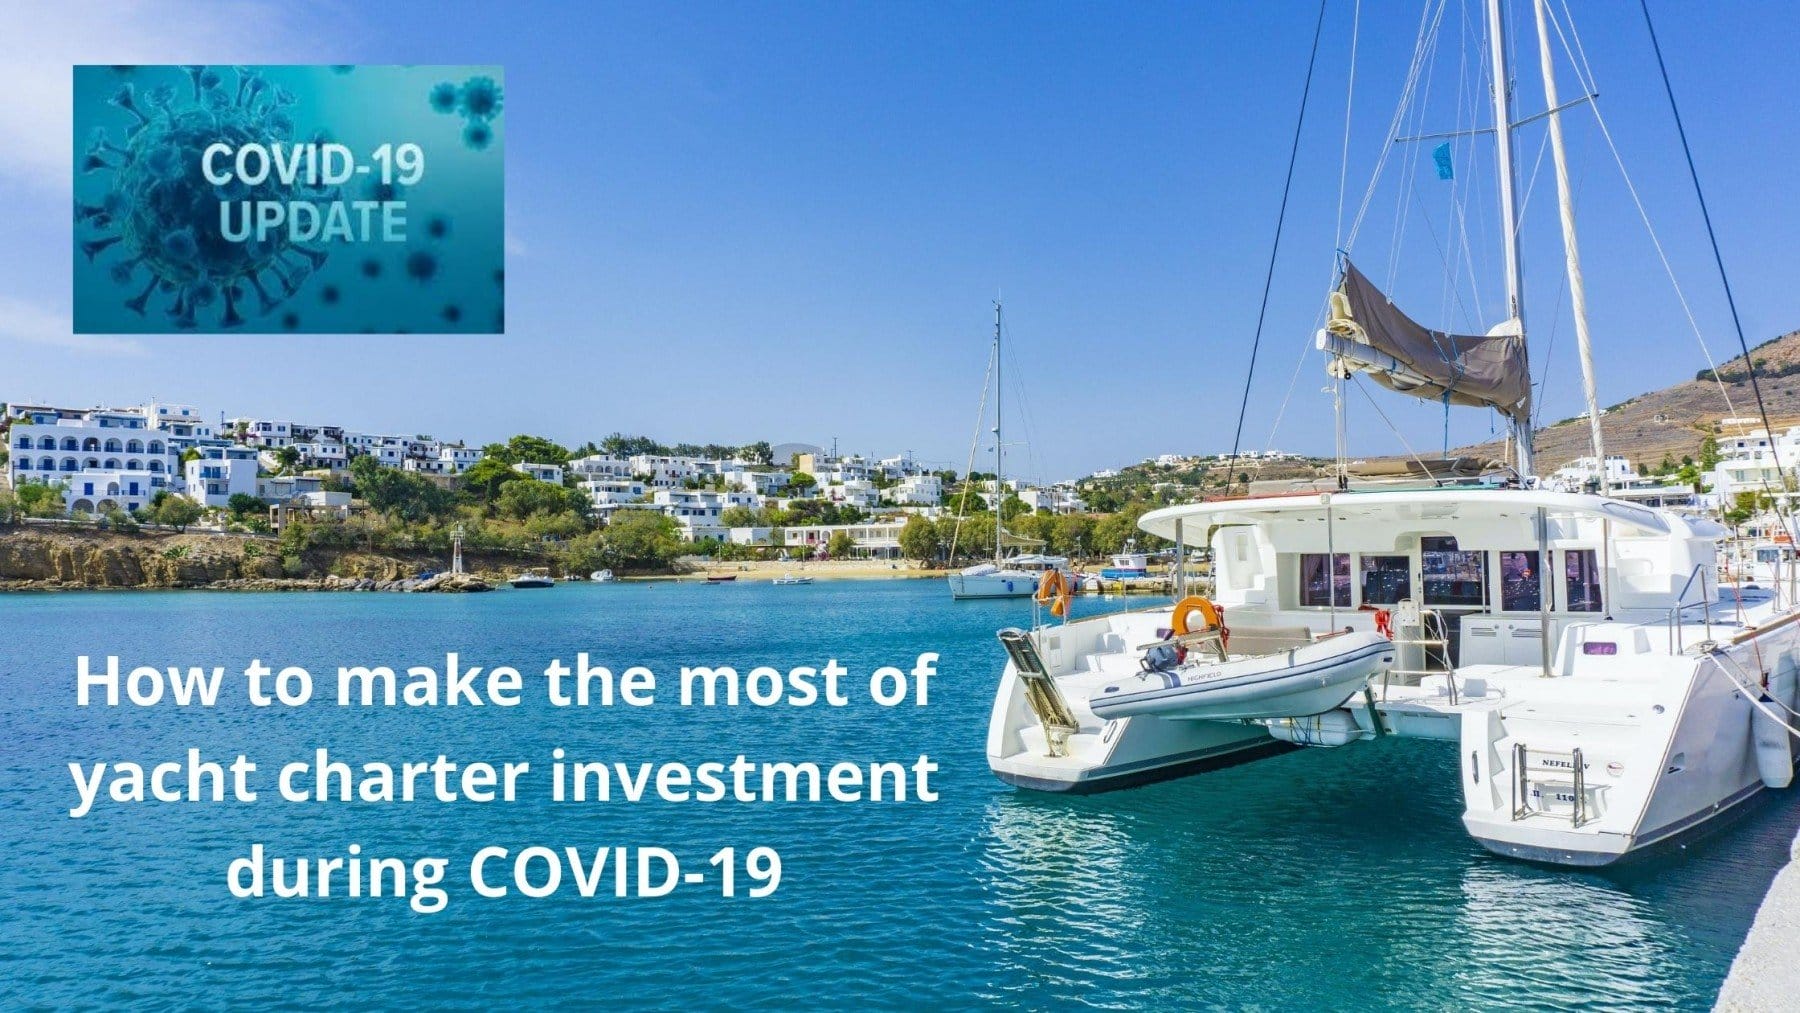 How to make the most of yacht charter investment during COVID-19